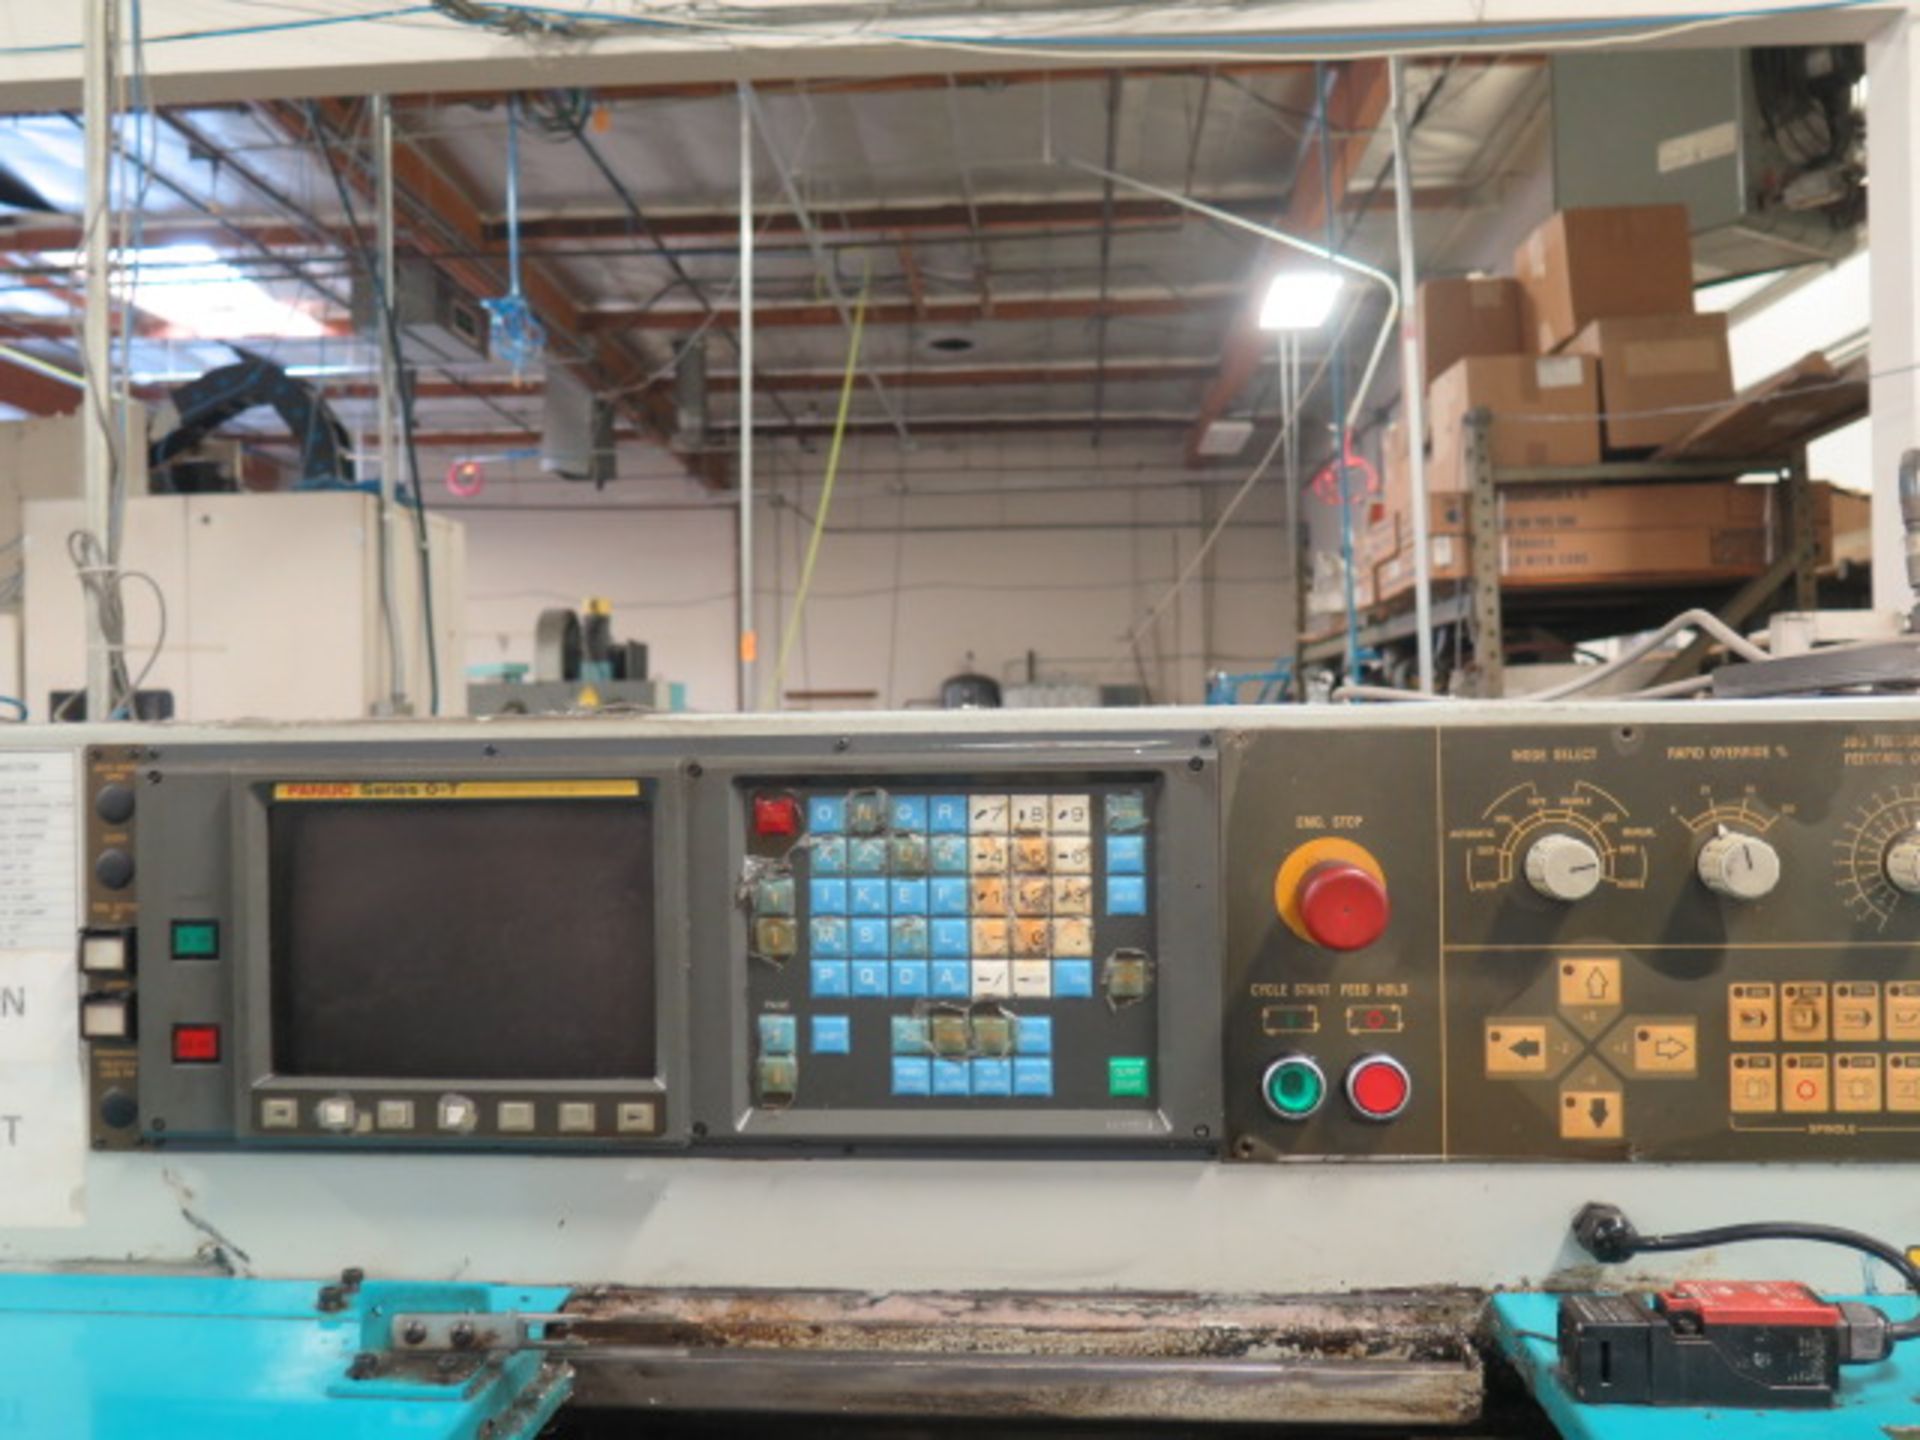 2001 Akira Seiki SL-15 CNC Turning Center s/n 01TC132-126 w/ Fanuc Series 0-T Controls, SOLD AS IS - Image 9 of 13